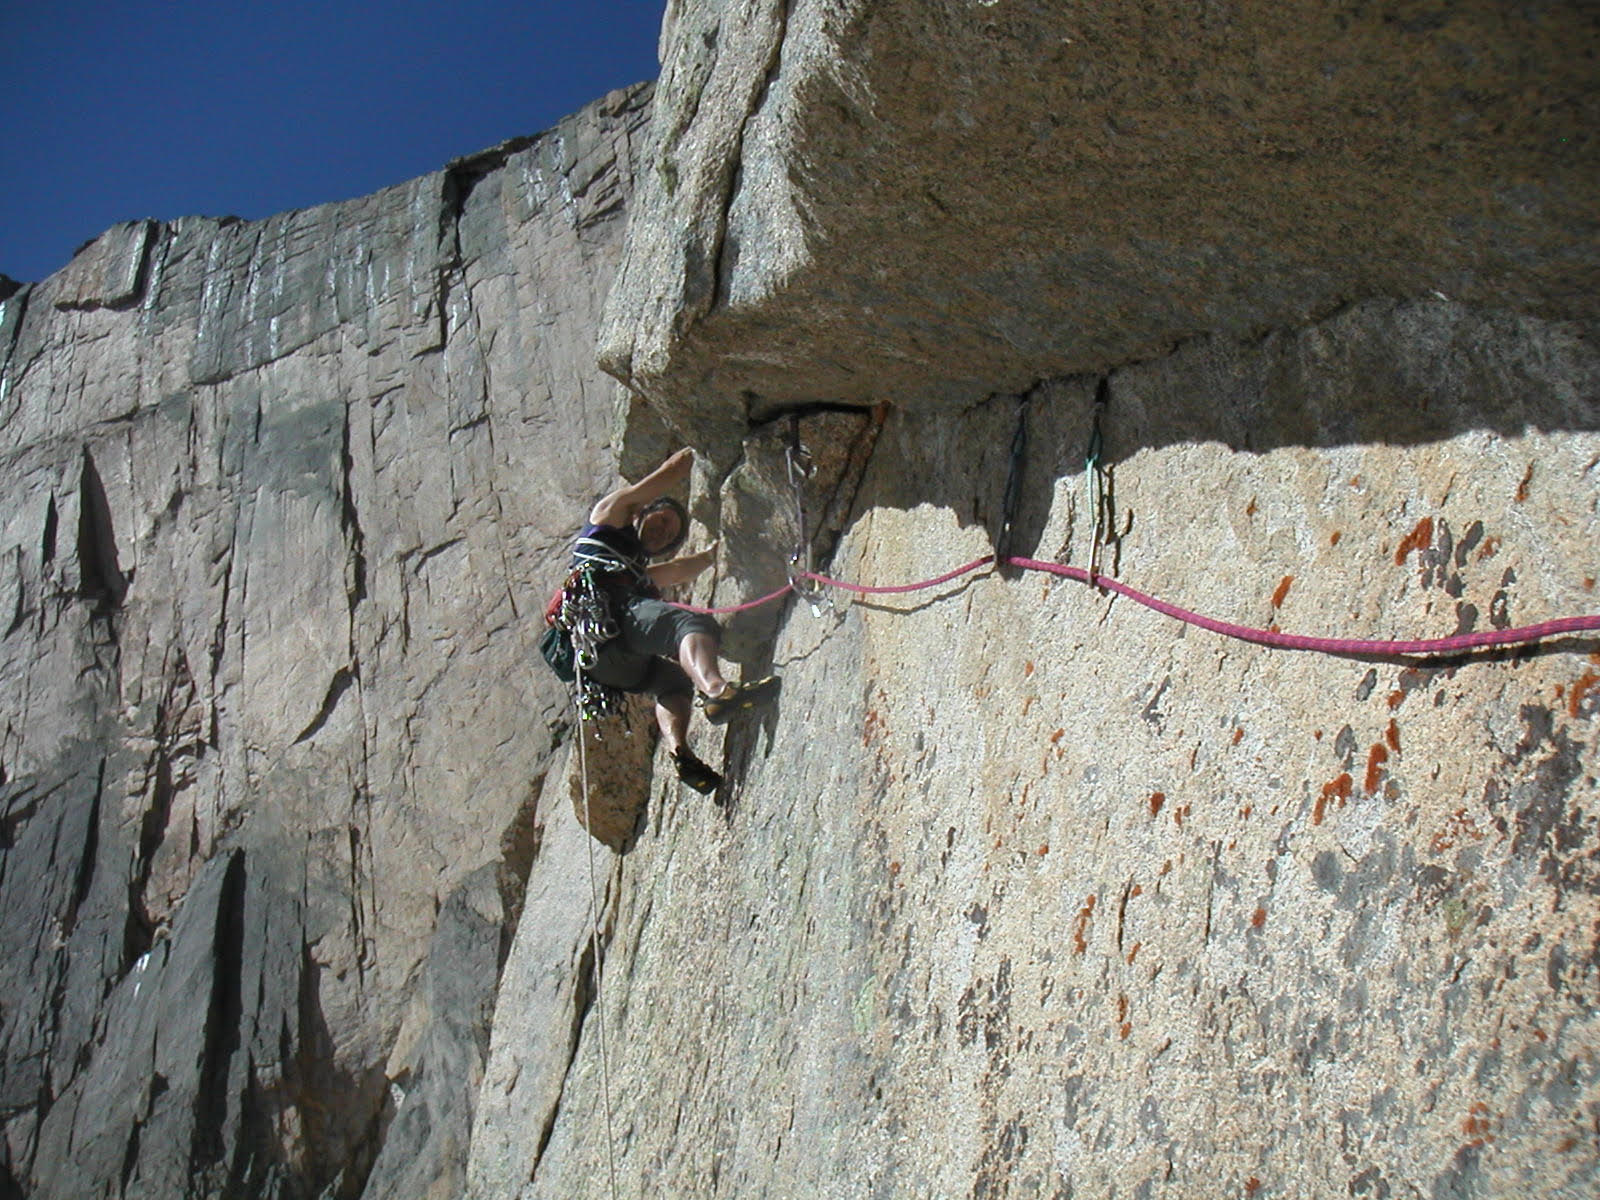 Chip Chace on Invisible Wall (IV 5.12a, 500'), Longs Peak. [Photo] Roger Briggs